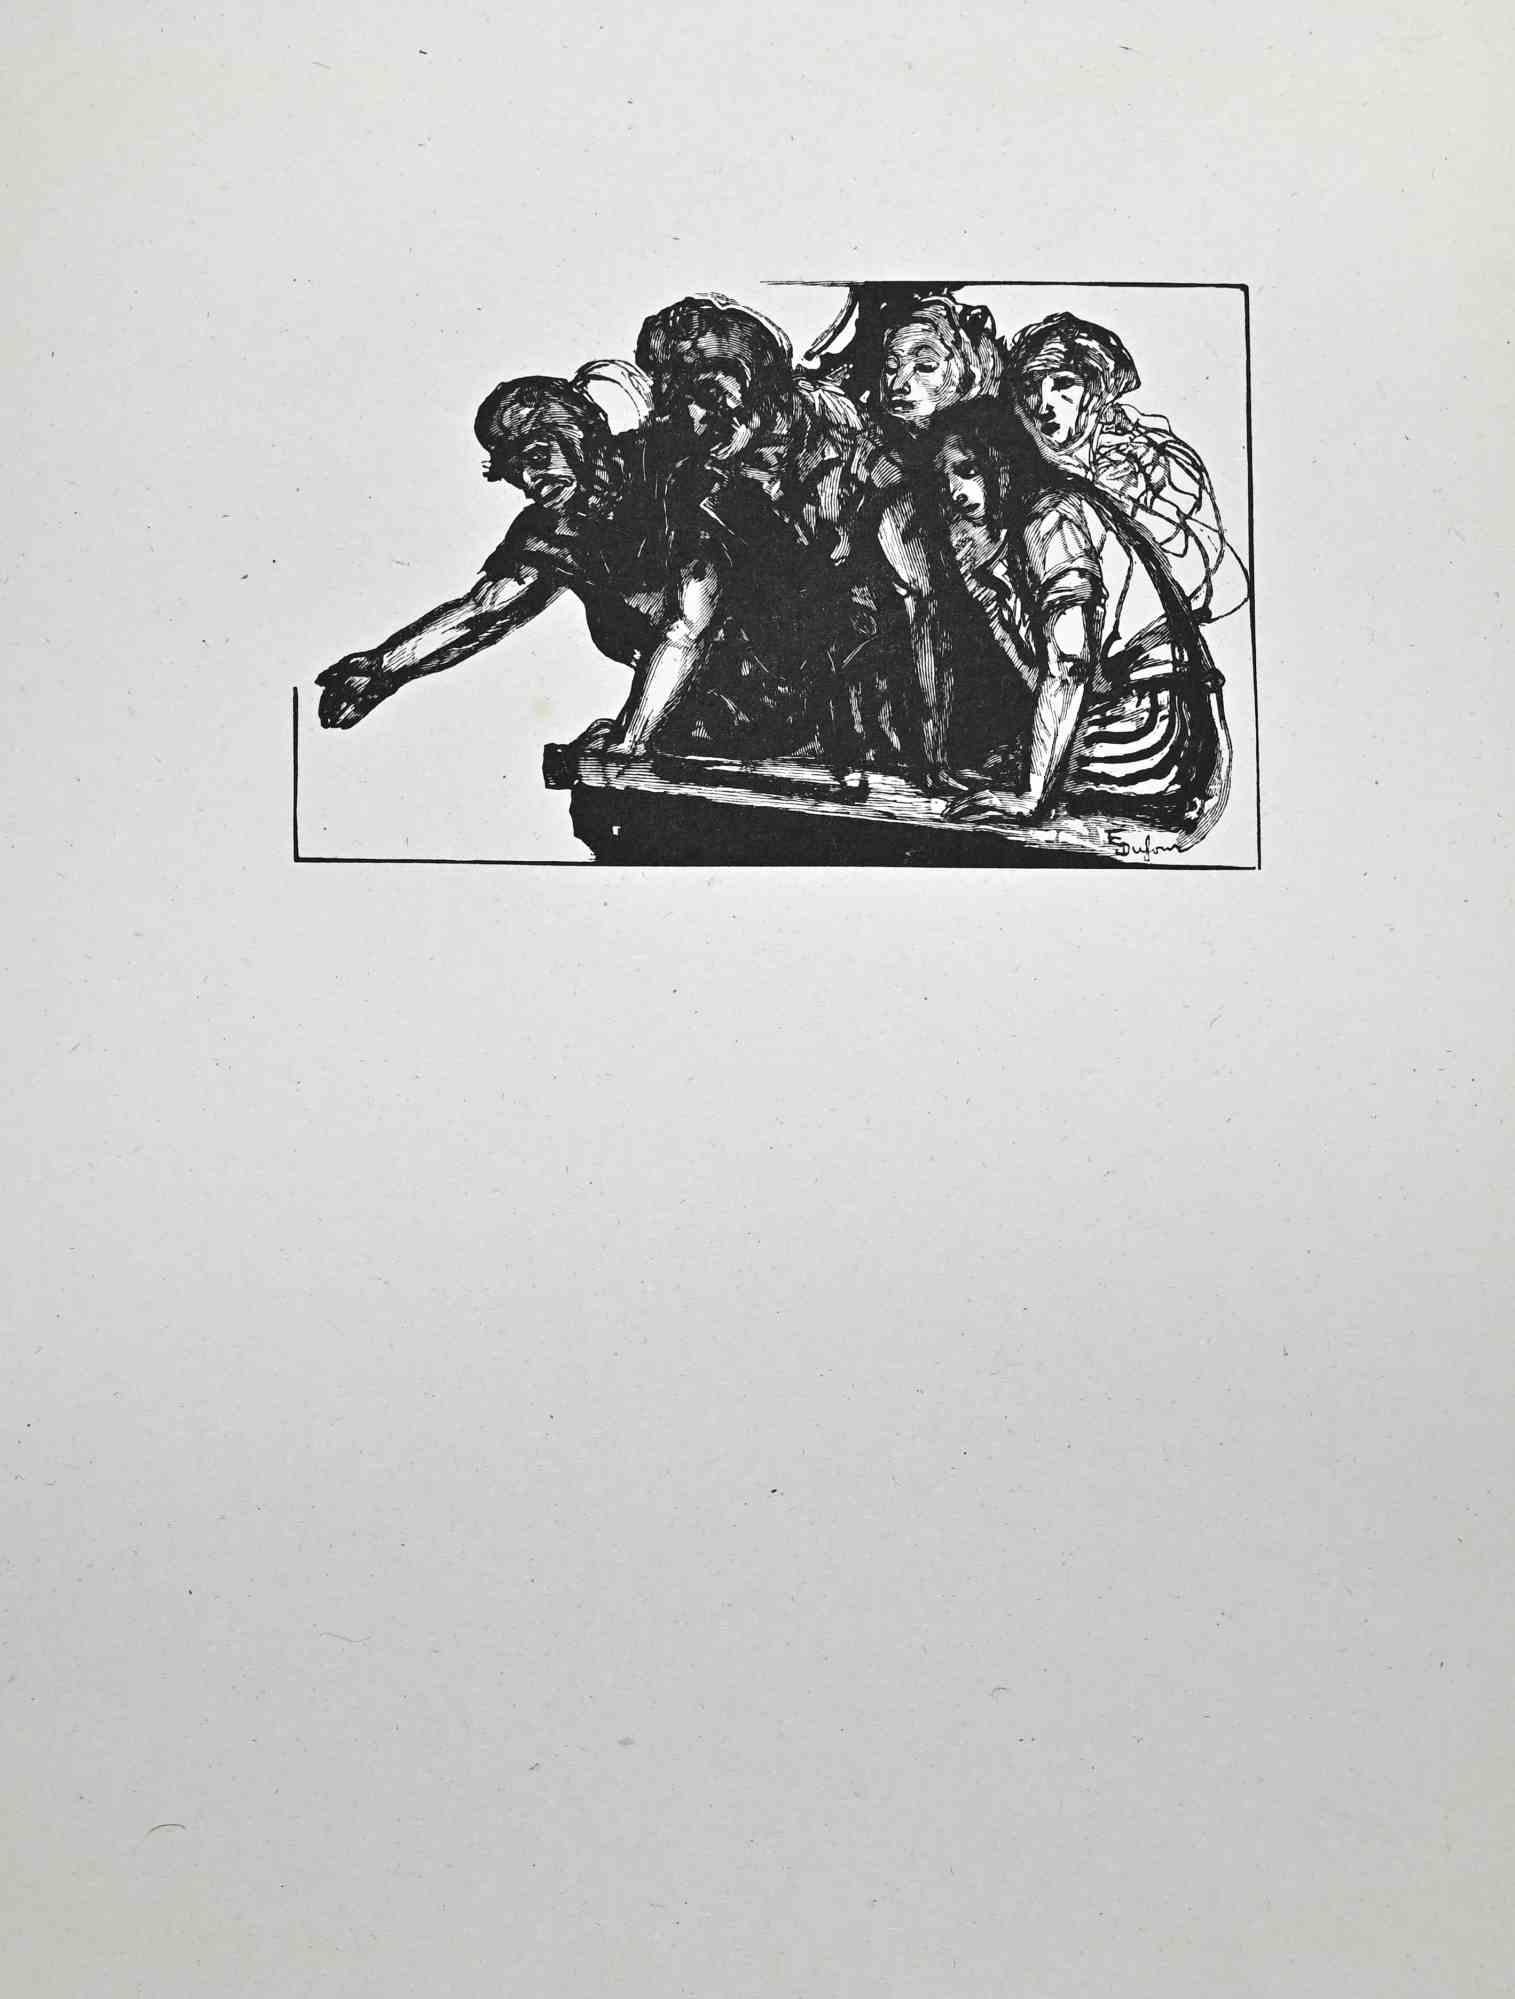 The Protest is a woodcut print on ivory-colored paper realized by Paul Baudier (1881-1962) in the 1930s.

Good conditions.

Paul Baudier, (born October 18, 1881 in Paris and died December 9, 1962 in Châtillon), was a French painter, engraver and